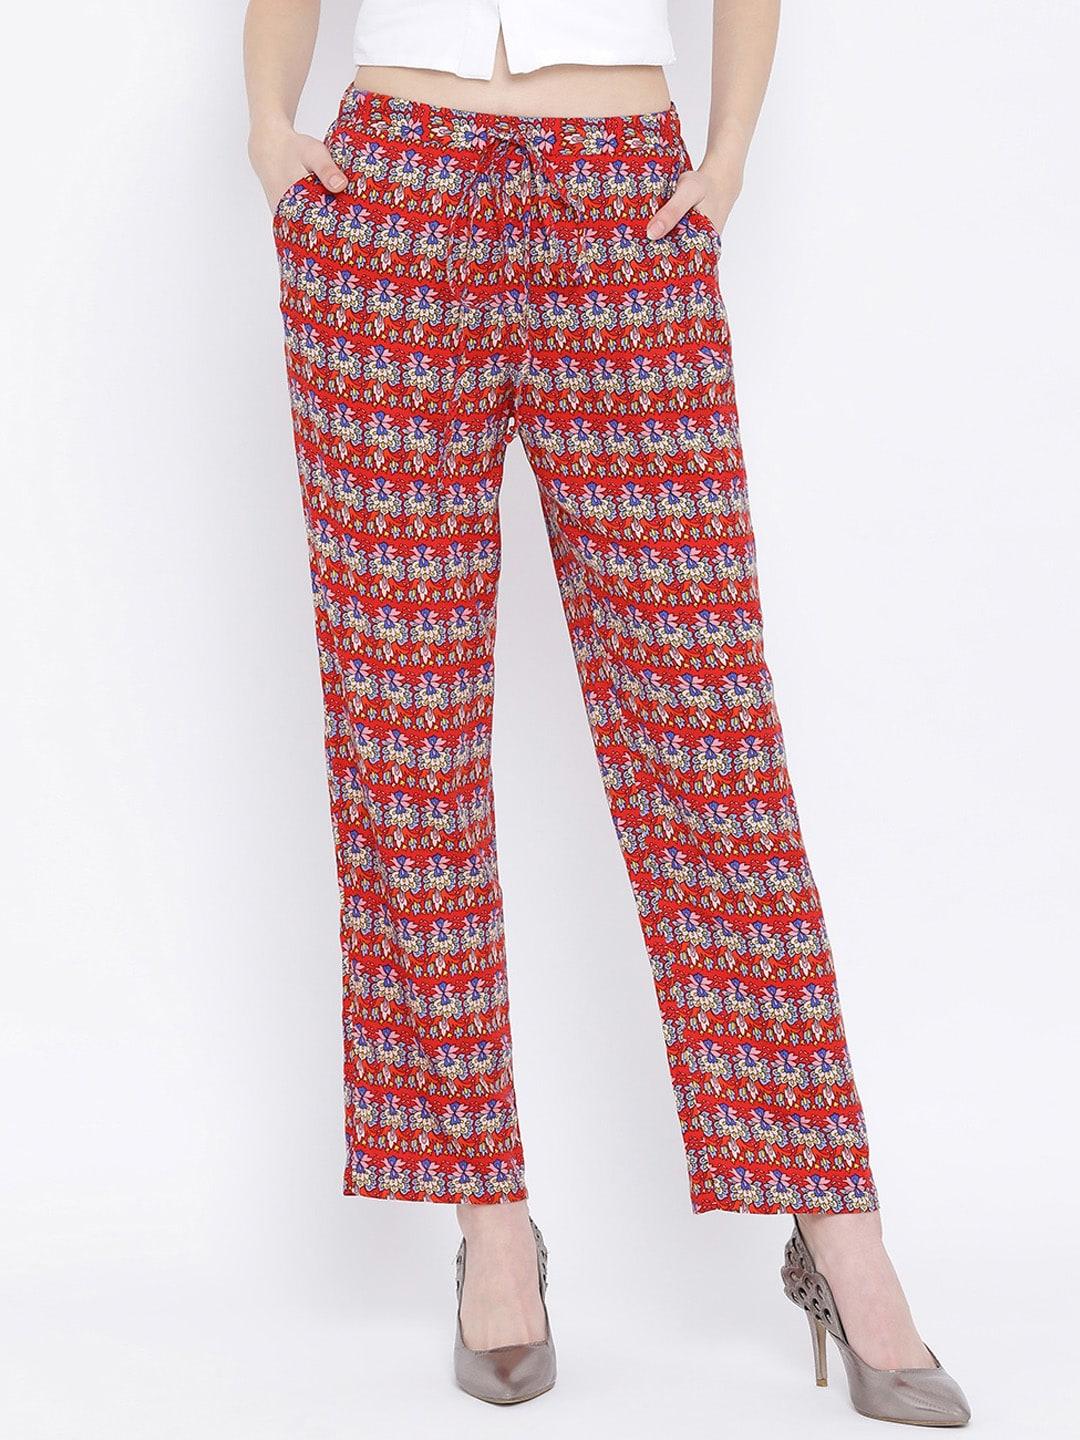 oxolloxo-women-red-&-white-regular-fit-printed-parallel-trousers